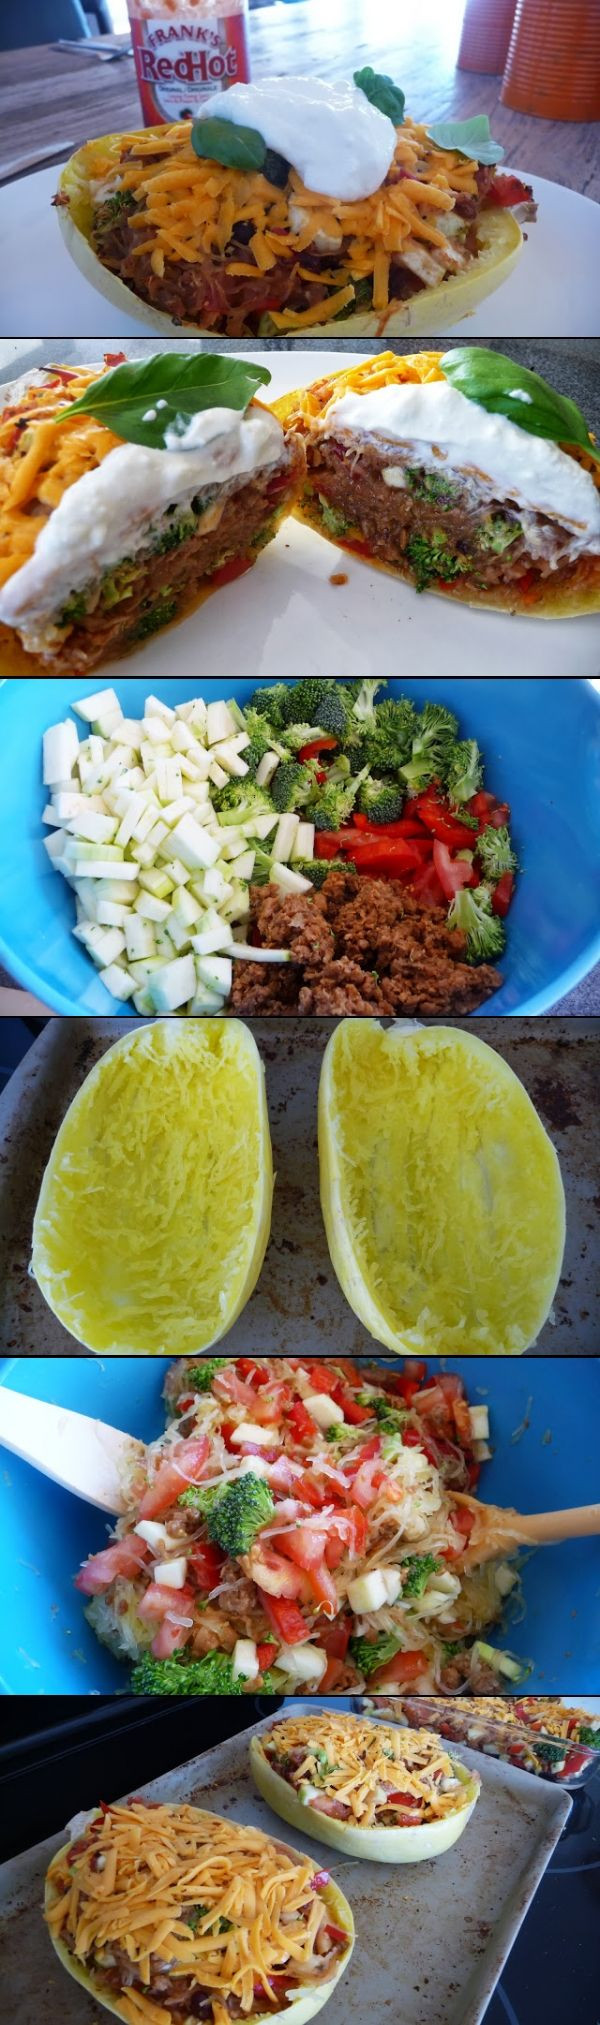 Low Calorie Filling Recipes
 Twice Baked Spaghetti Squash Healthy low calorie